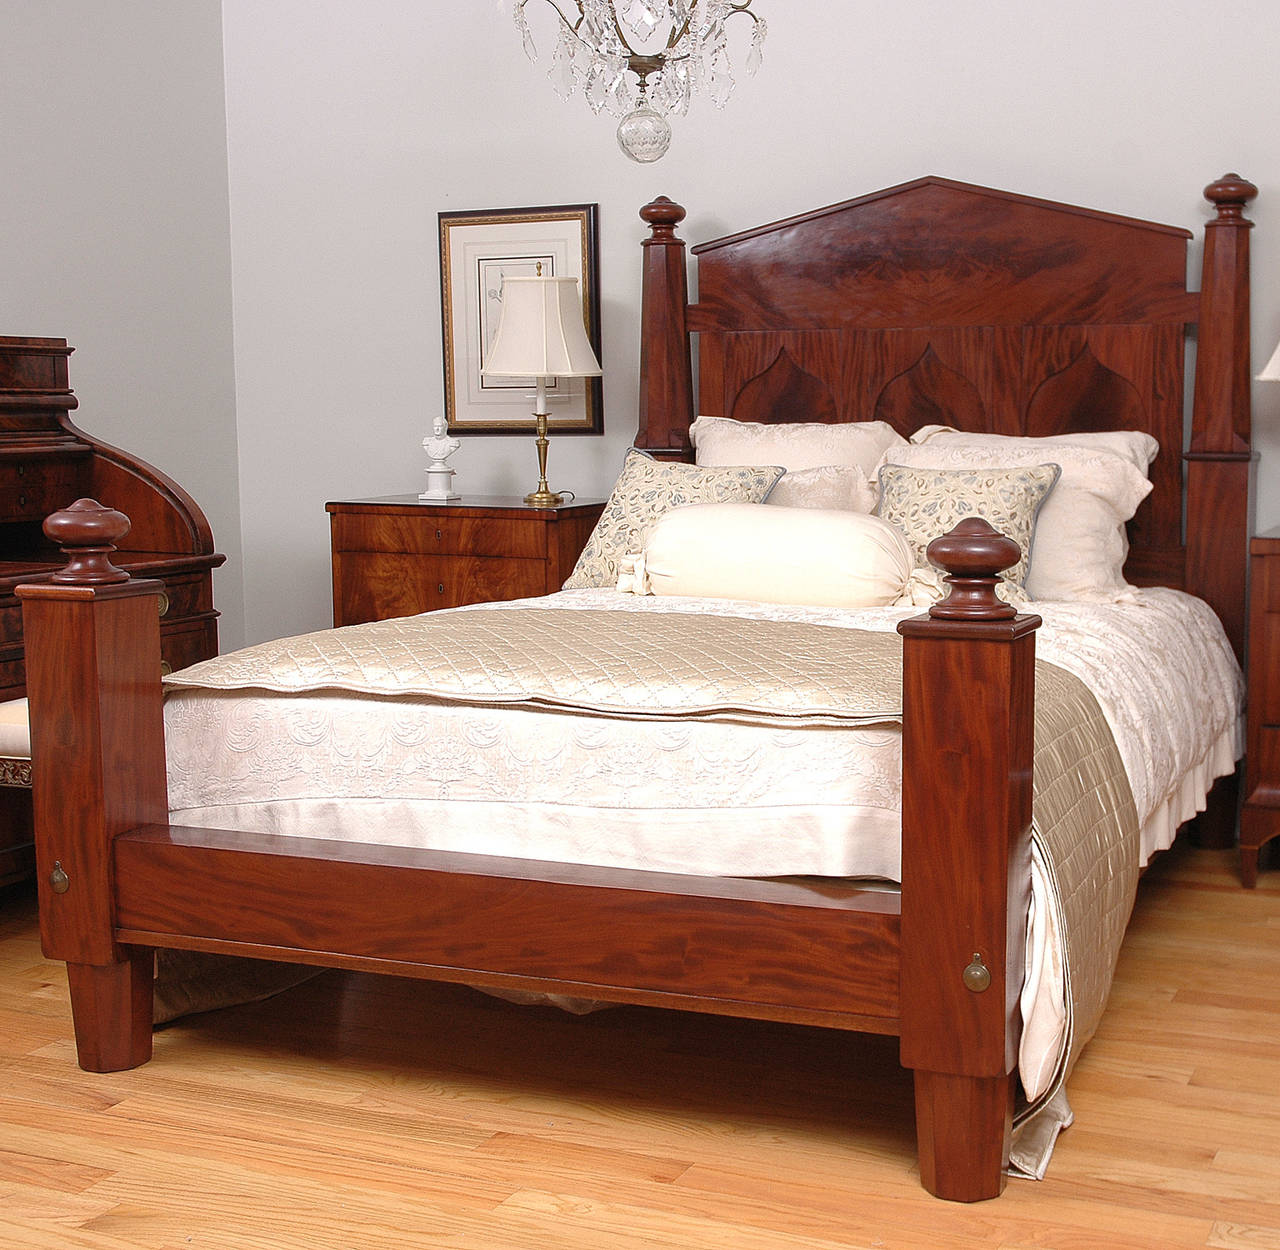 19th Century American Empire Bed in Mahogany adapted to Queen Size, c. 1840